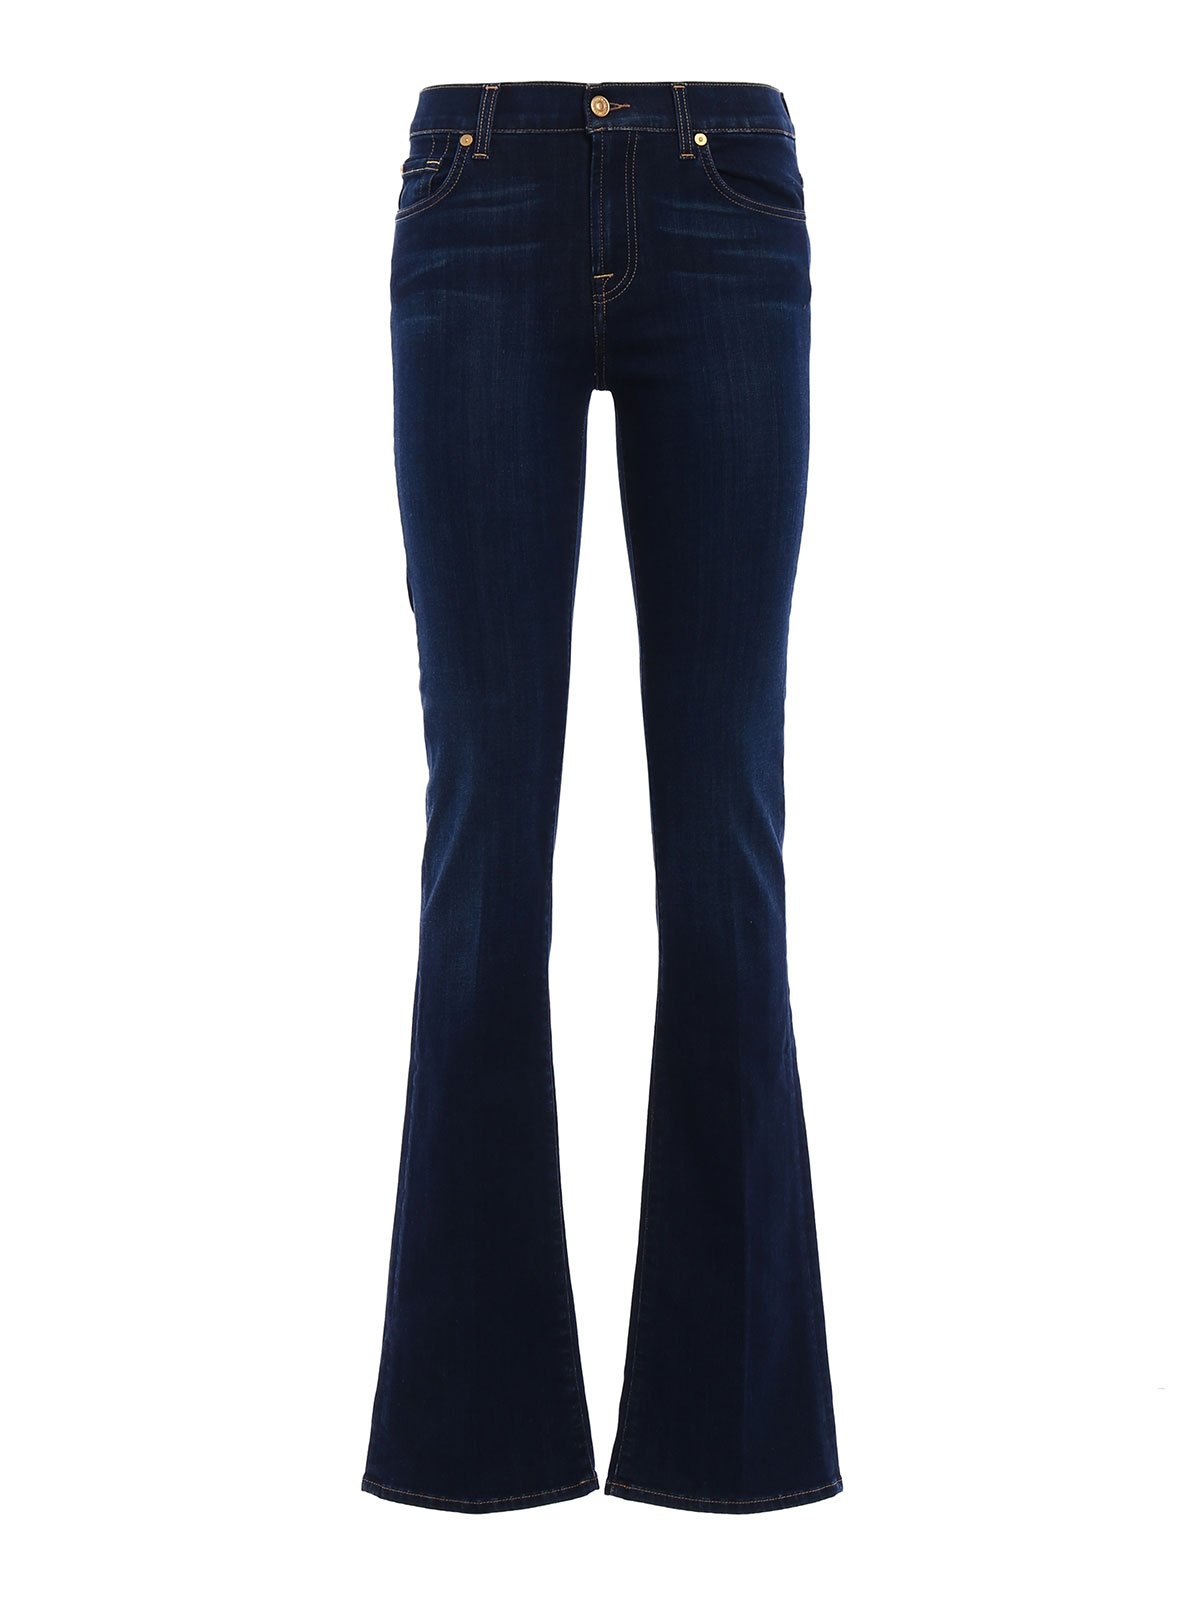 Bootcut jeans 7 For All Mankind - Stretch denim bootcut jeans - SWB887XHA